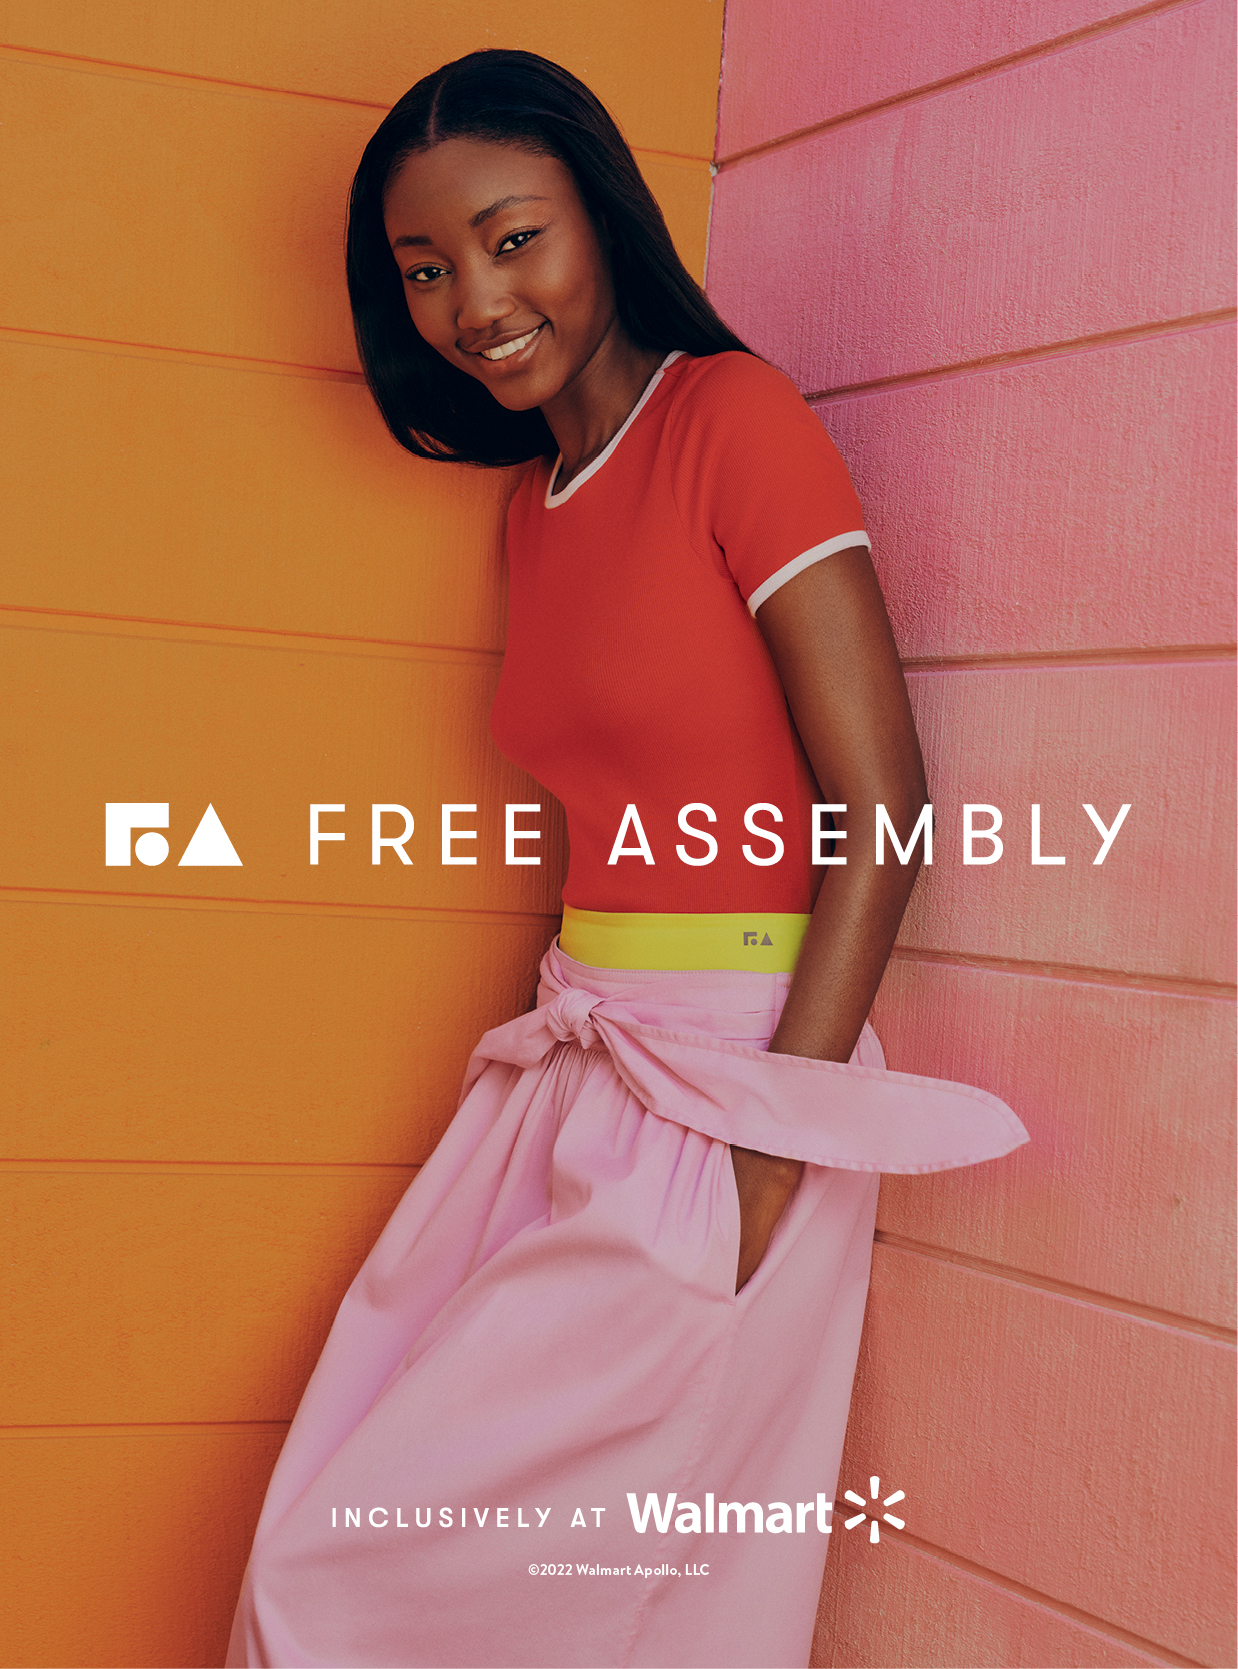 Free Assembly, Summer '22, Elle page ad